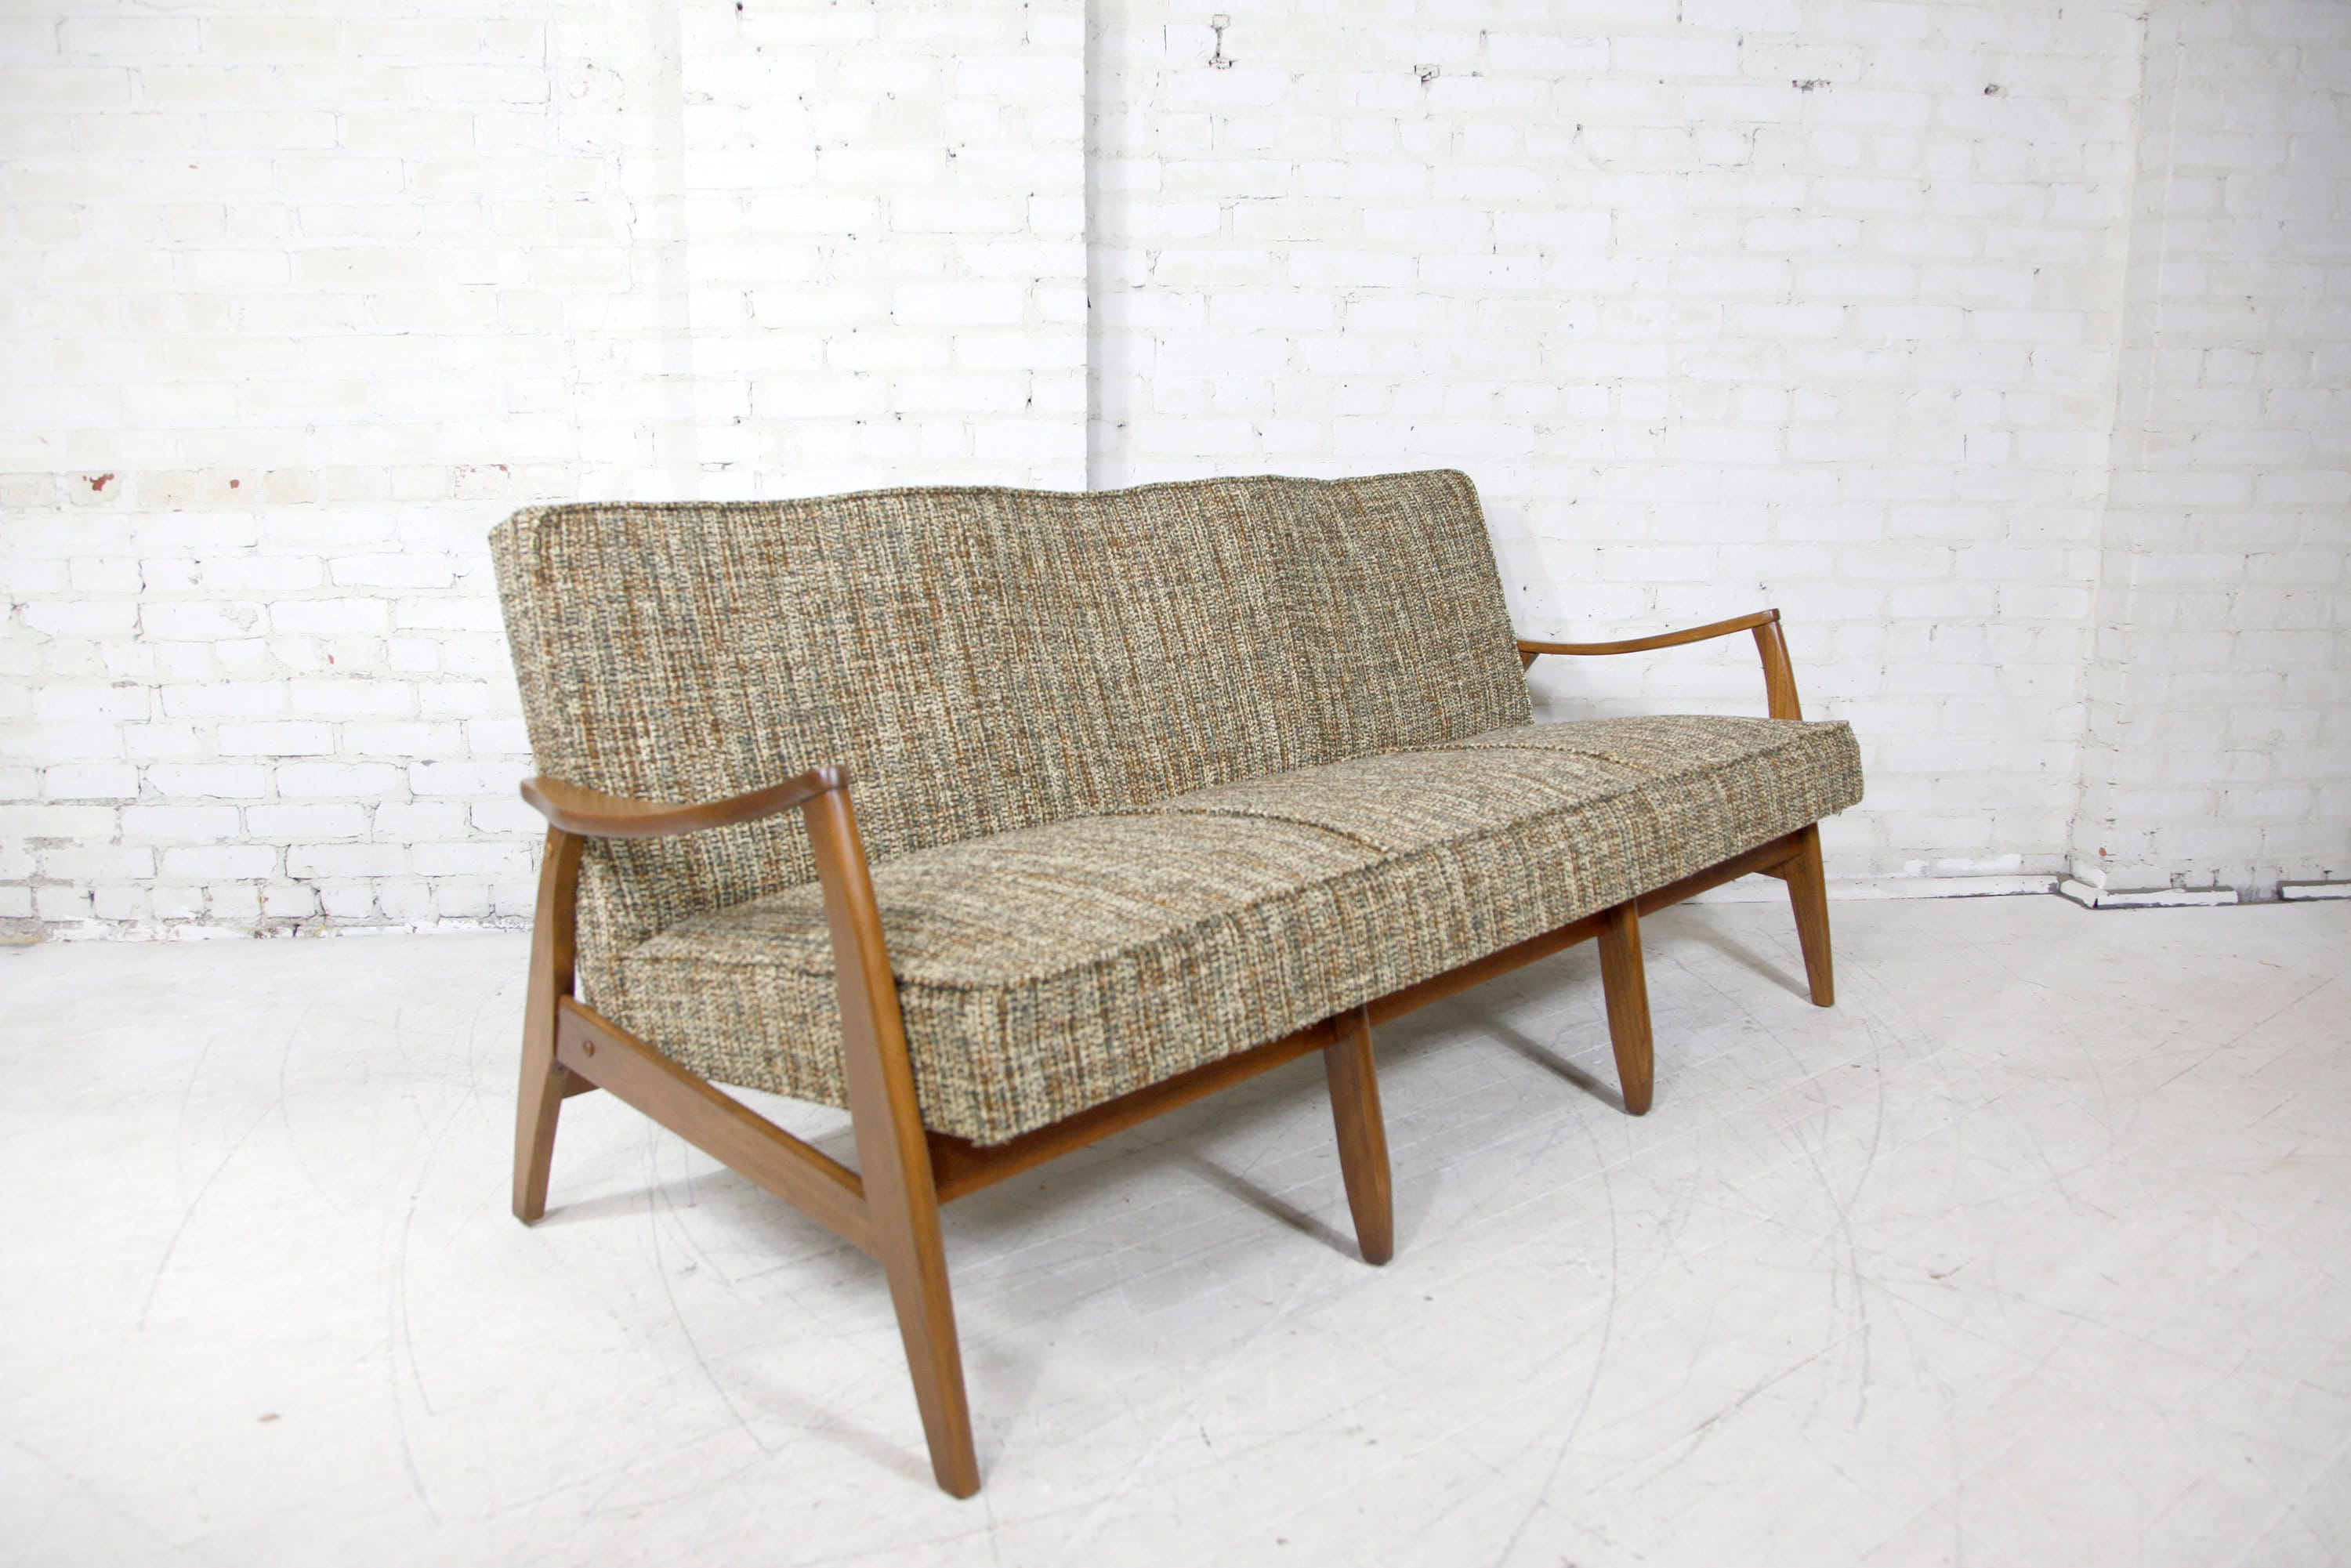 Sculpted Seater Frame Valley MCM Only NYC Delivery Areas - 3 Wood Etsy and Sofa in Vintage Hudson Free